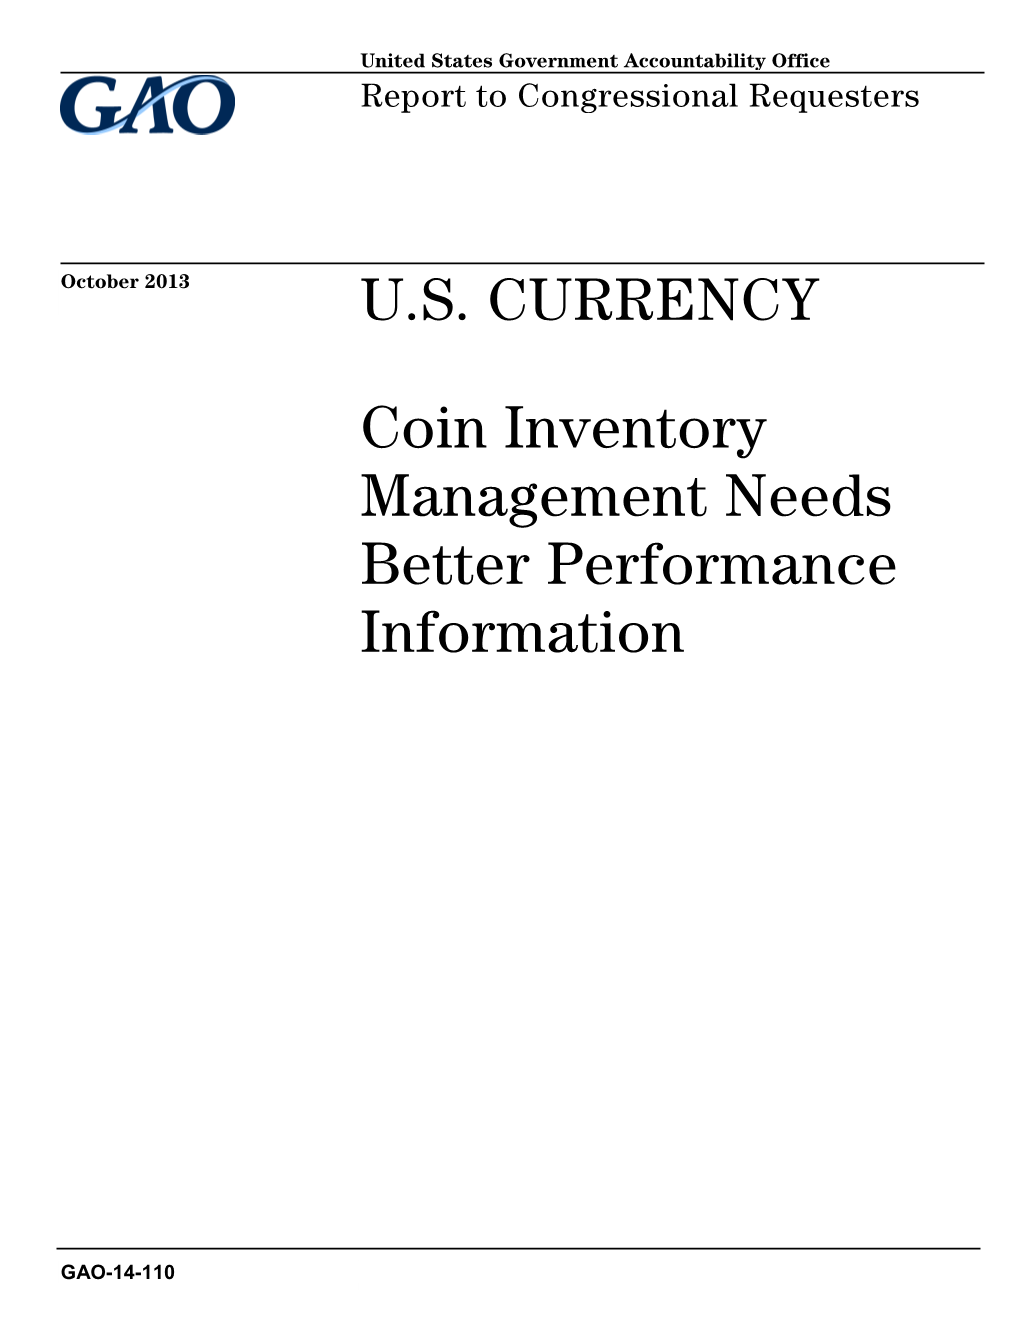 GAO-14-110, U.S. Currency: Coin Inventory Management Needs Better Performance Information